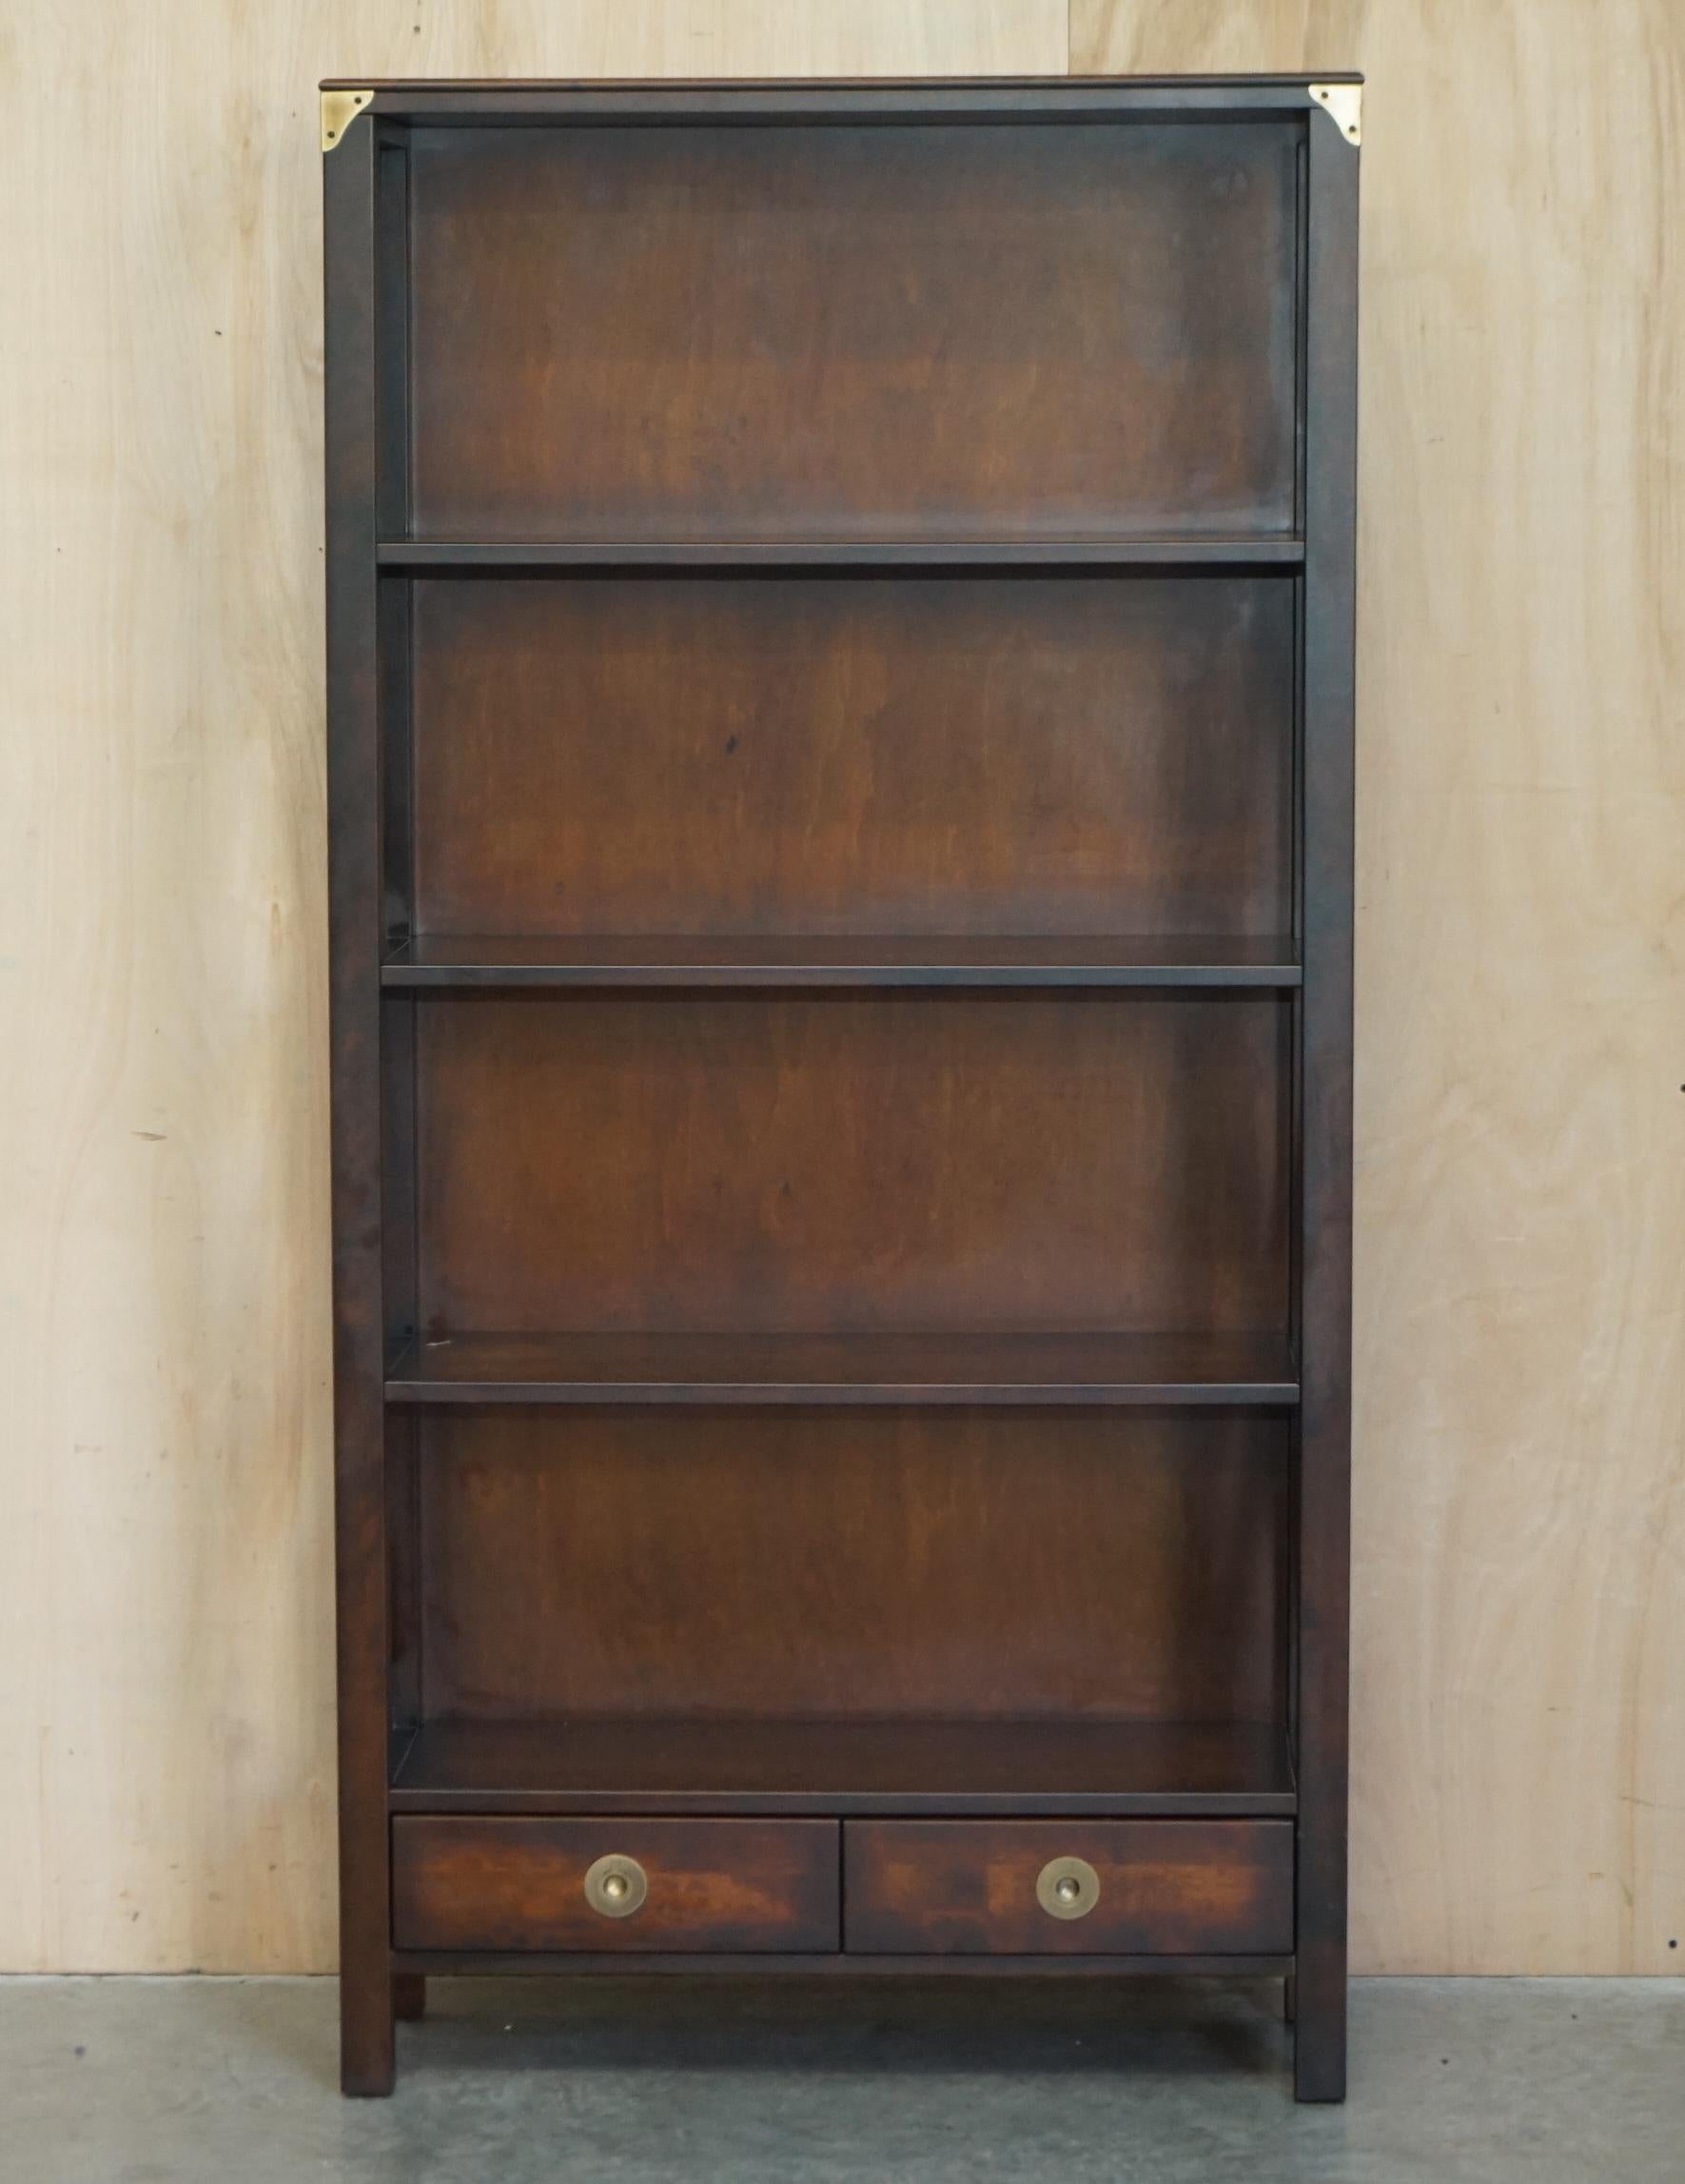 We are delighted to offer for sale 1 of 2 Laura Ashley military campaign bookcases.

I have two of these in stock, this is the smaller one and then a slightly larger one which is listed under my other items and not included in this sale.

This